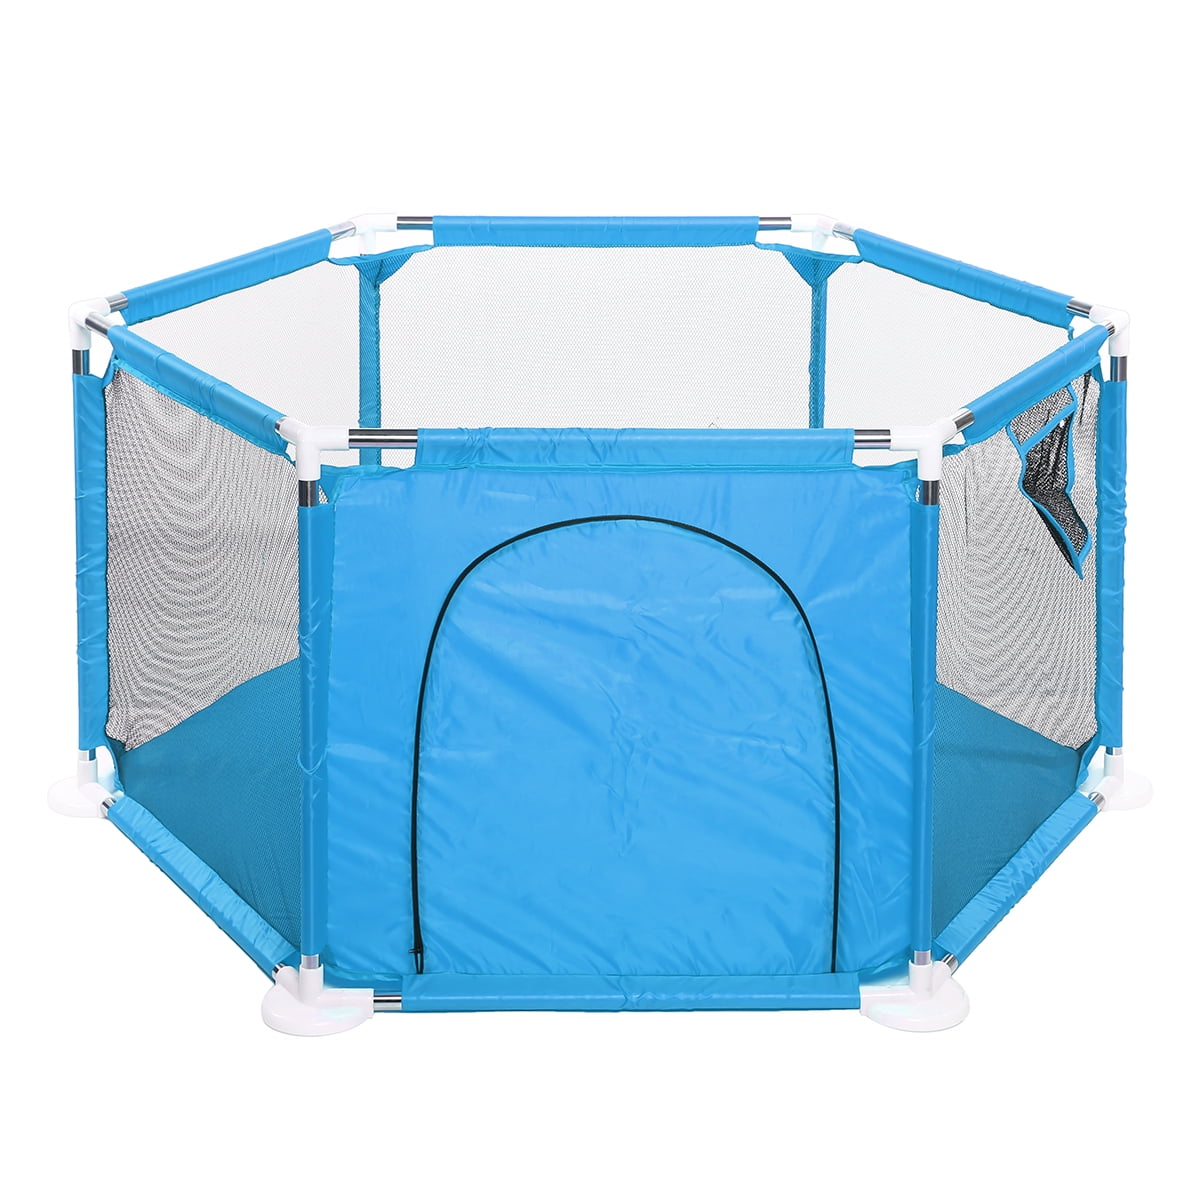 Safety Baby Fence Crawling Mat,Indoor And Outdoor Play Color : Blue Playpens For Toddlers Playpen Baby 190X129X66CM Playpen Playpens For Toddlers Baby Fence Play Area